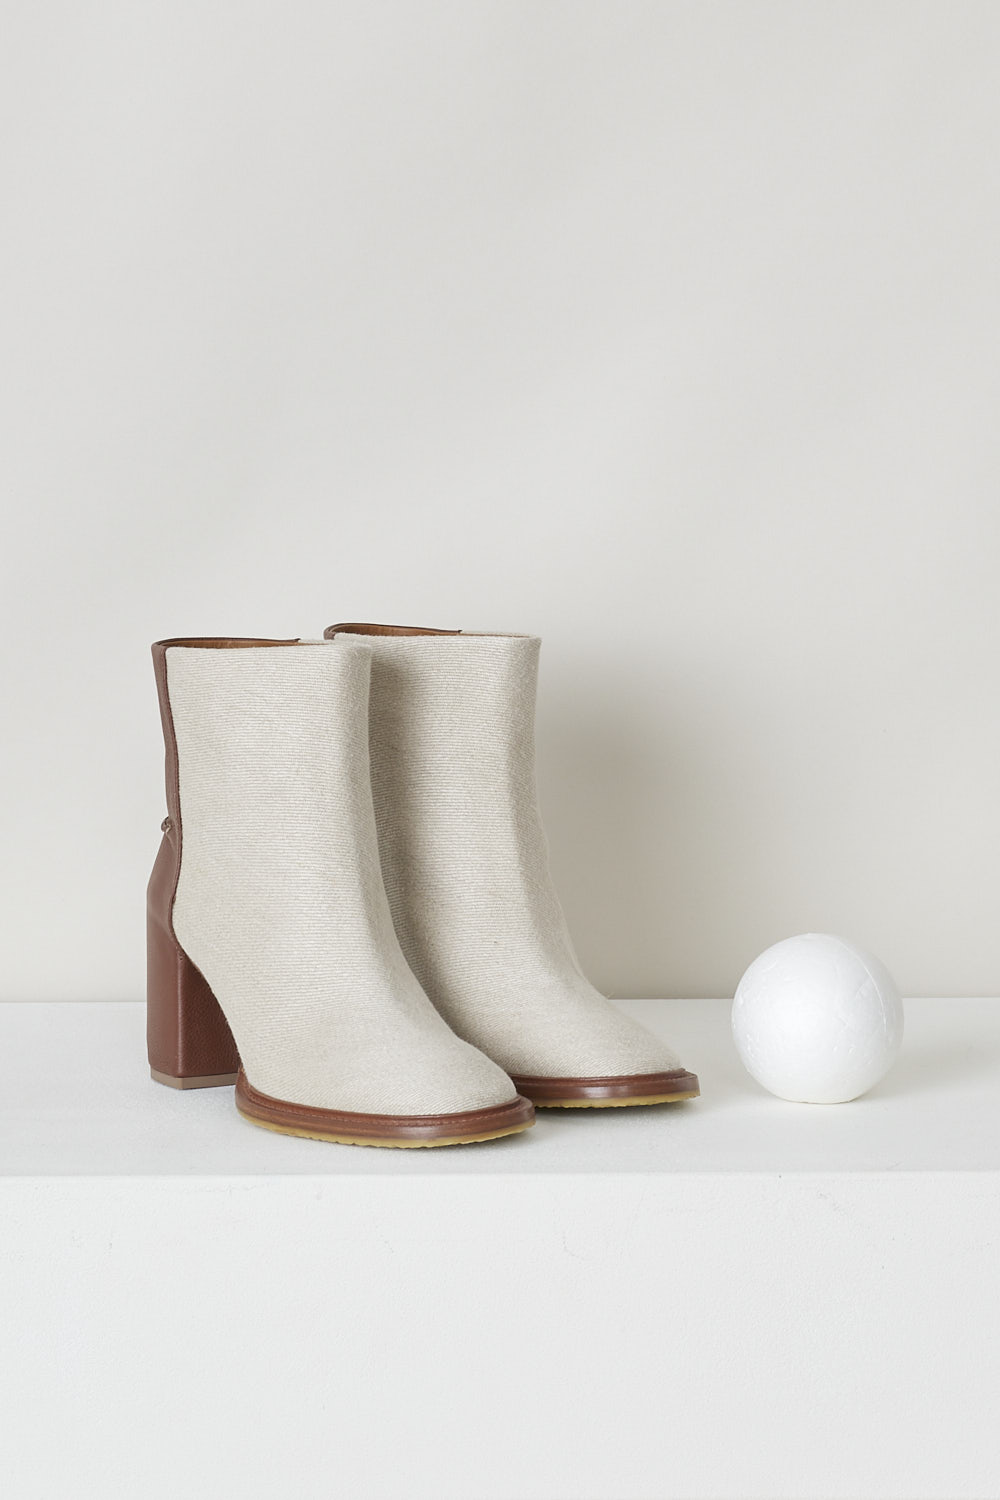 CHLOÃ‰, BEIGE EDITH ANKLE BOOT WITH BROWN HEEL, CHC22S521W89C, Beige, Brown, Front, These beige slip-on ankle boots have a brown leather-clad block heel with white stitching on the ankle. The boots have a round toe and a contrasting brown sole. 
